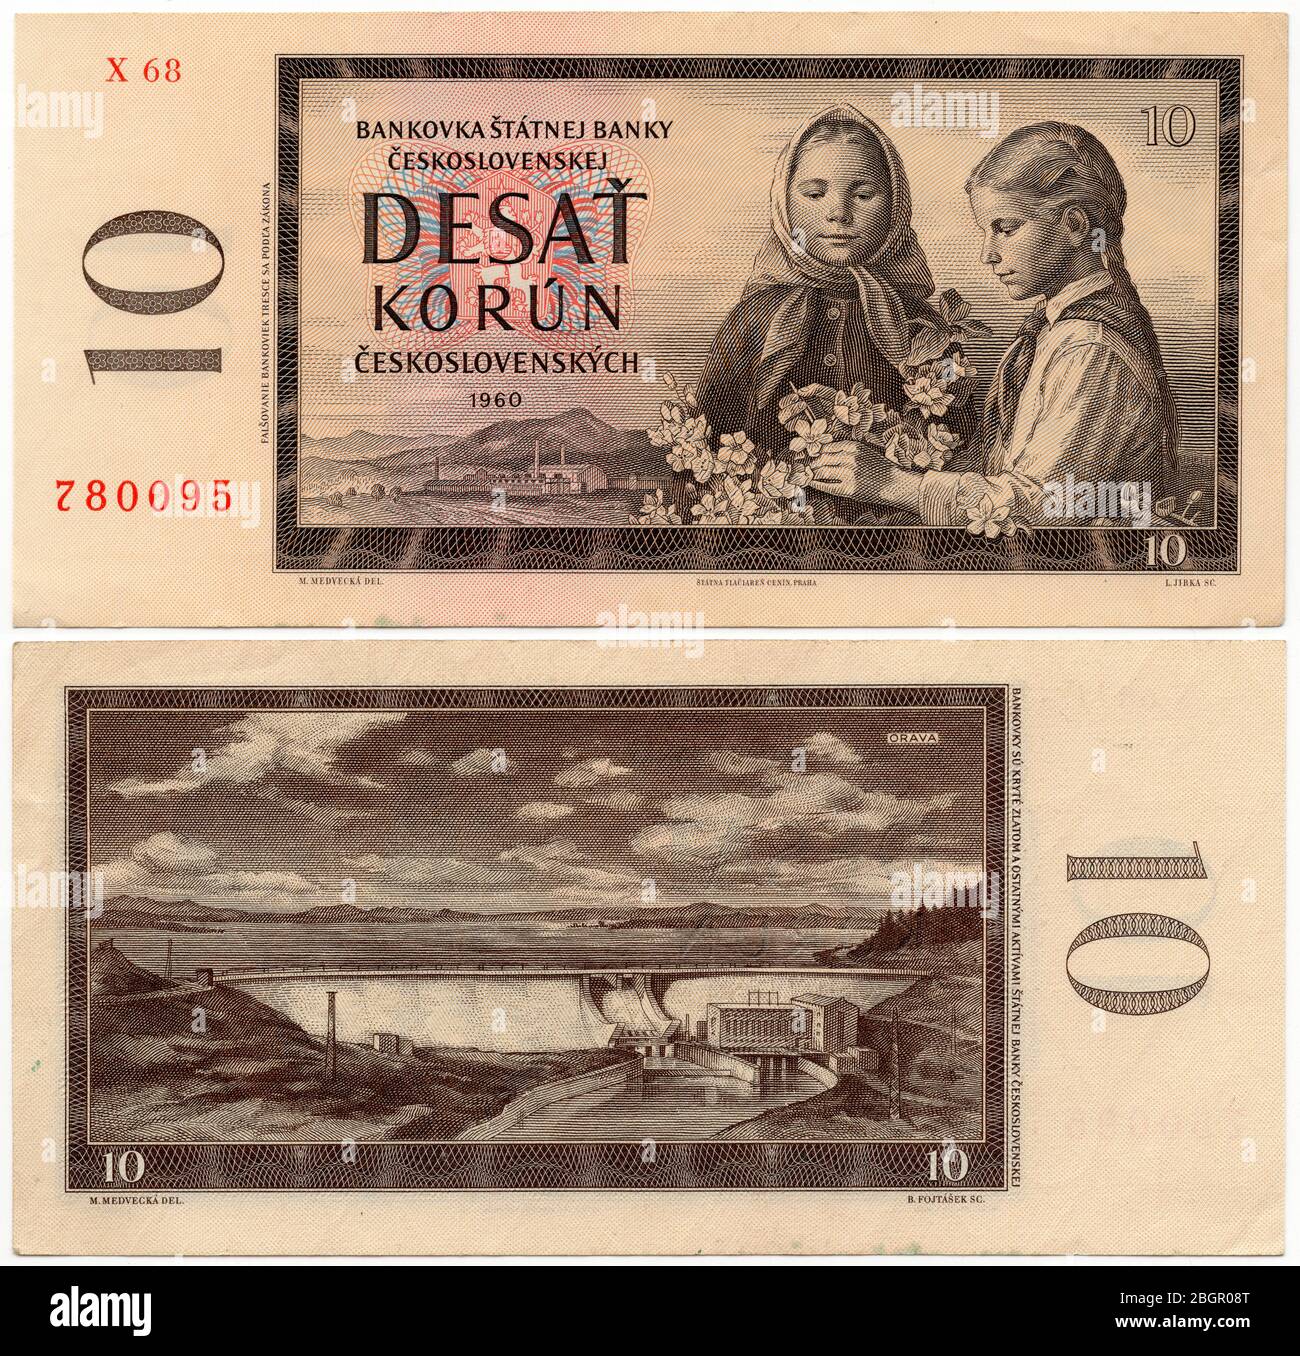 10 Czechoslovak koruna banknote (1960) issued in the Czechoslovak Socialist Republic. The banknote was designed by Slovak graphic artist Mária Medvecká. The Orava Reservoir in Slovakia is depicted in the recto. Stock Photo